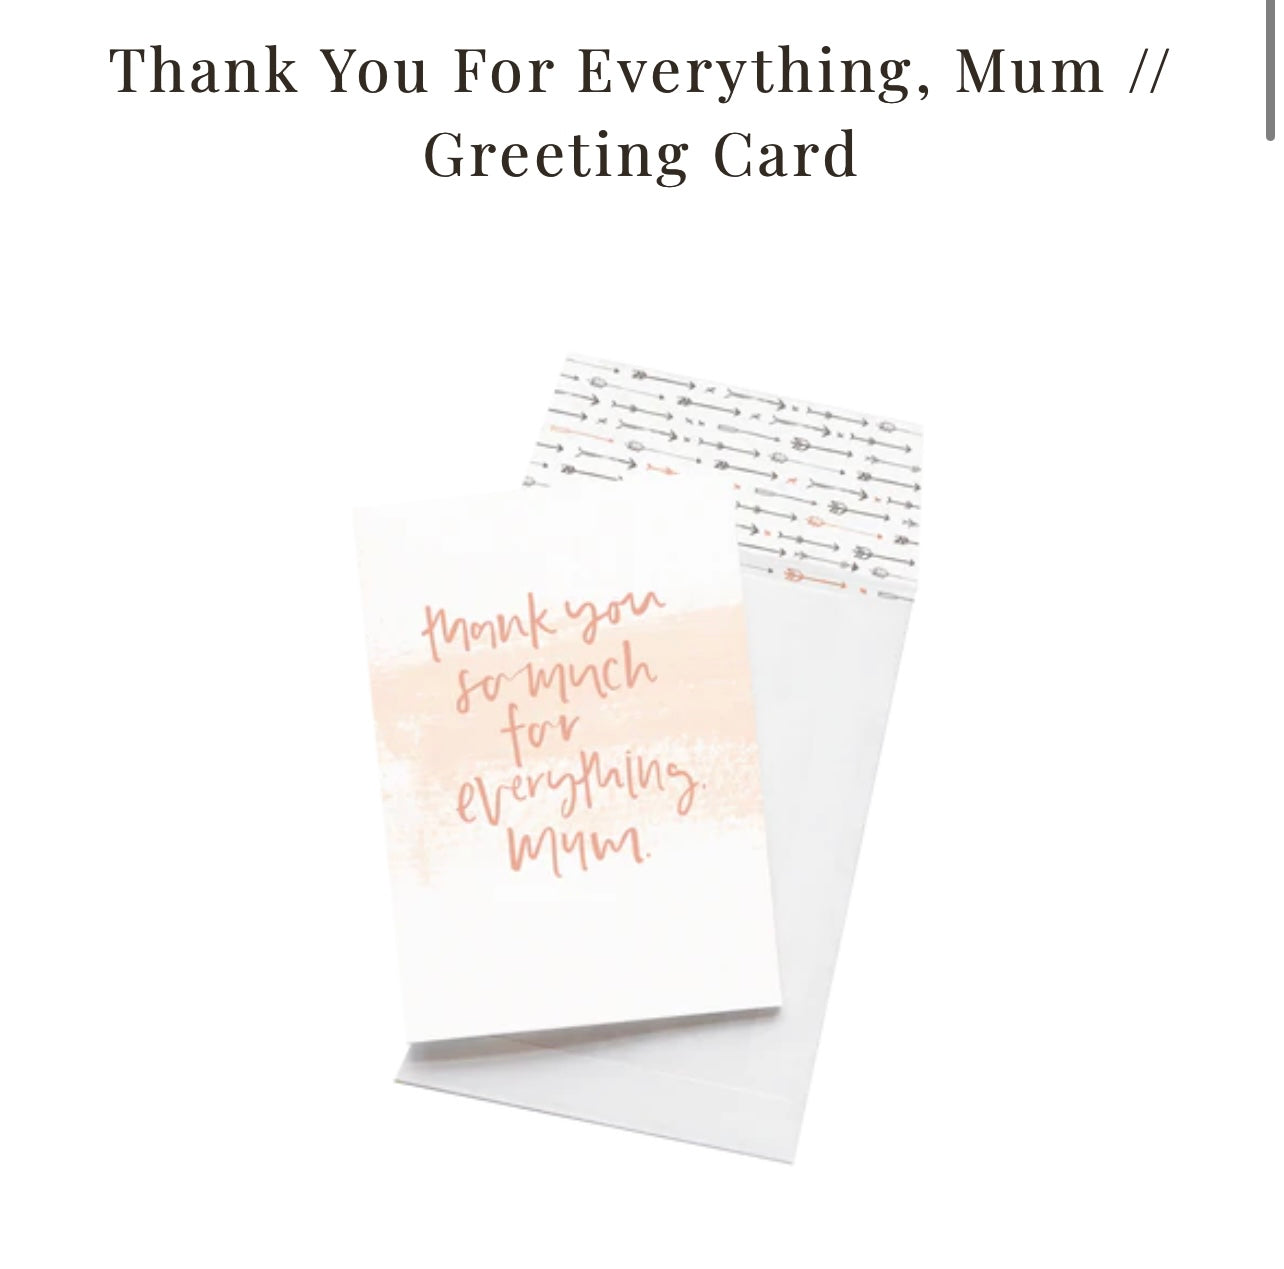 Thank-you for everything Greeting Card